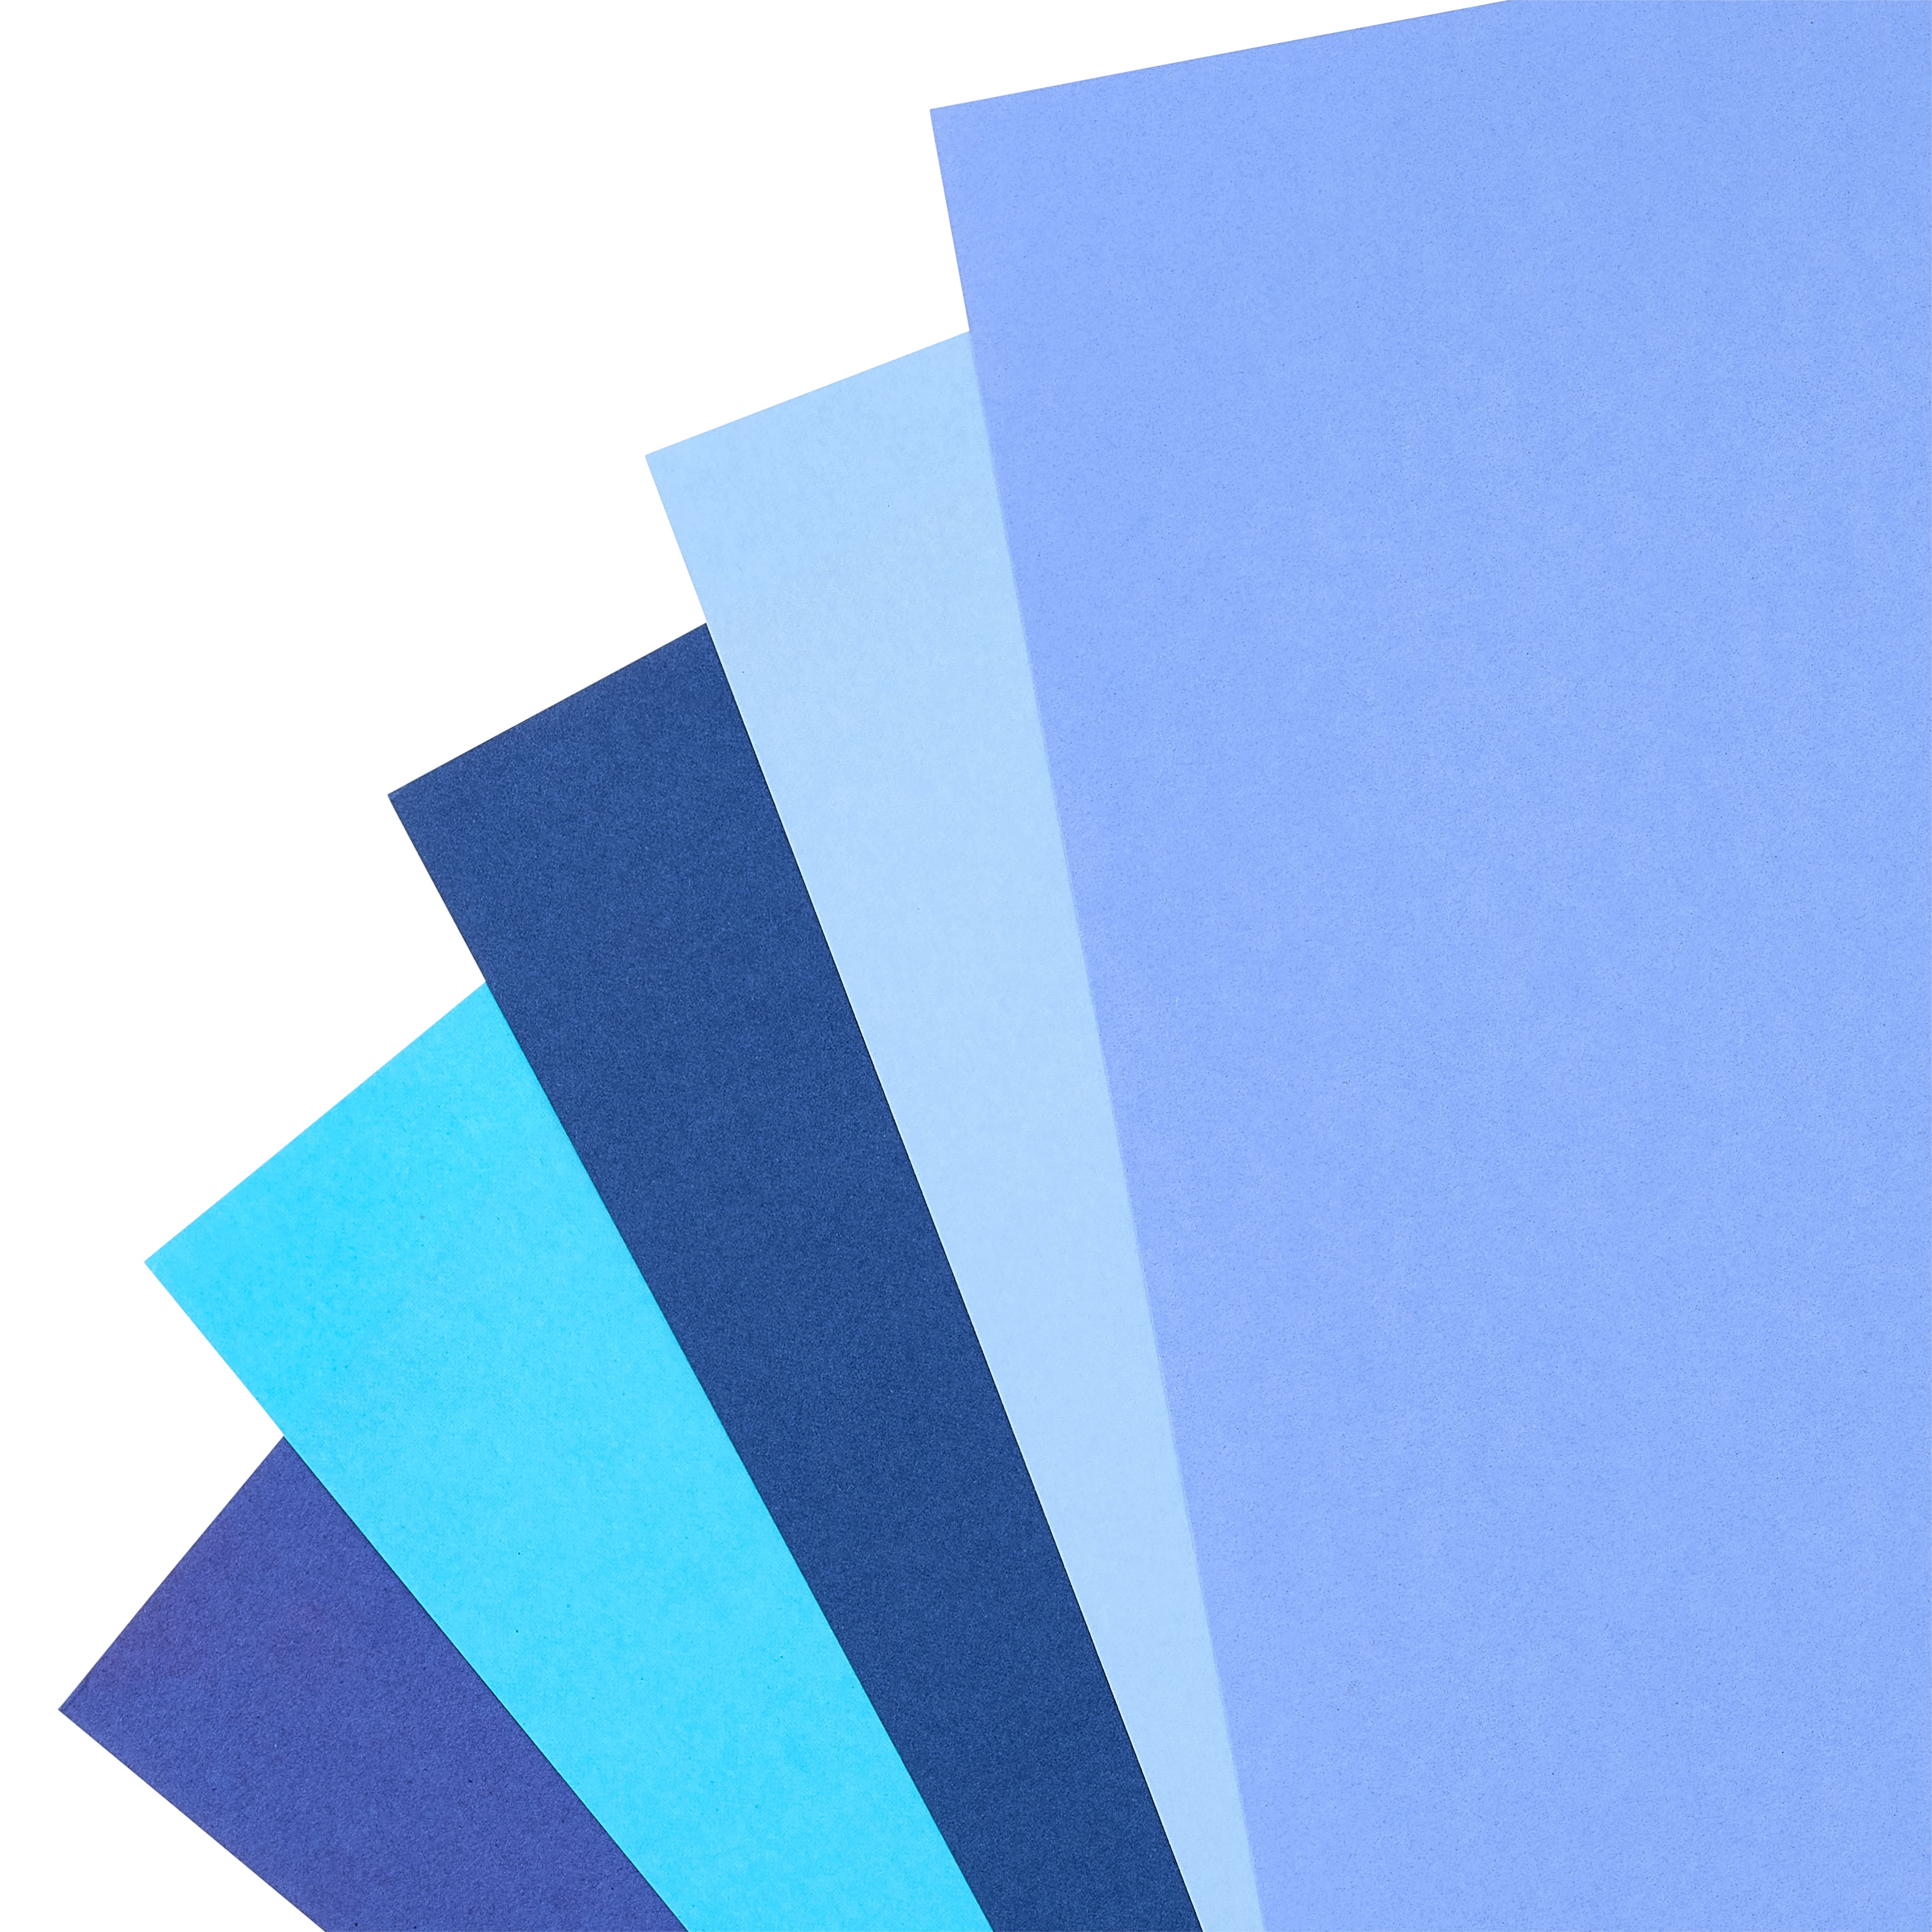 Recollections Cardstock Paper, 8 1/2 X 11-Blue Ombre-50 Sheets